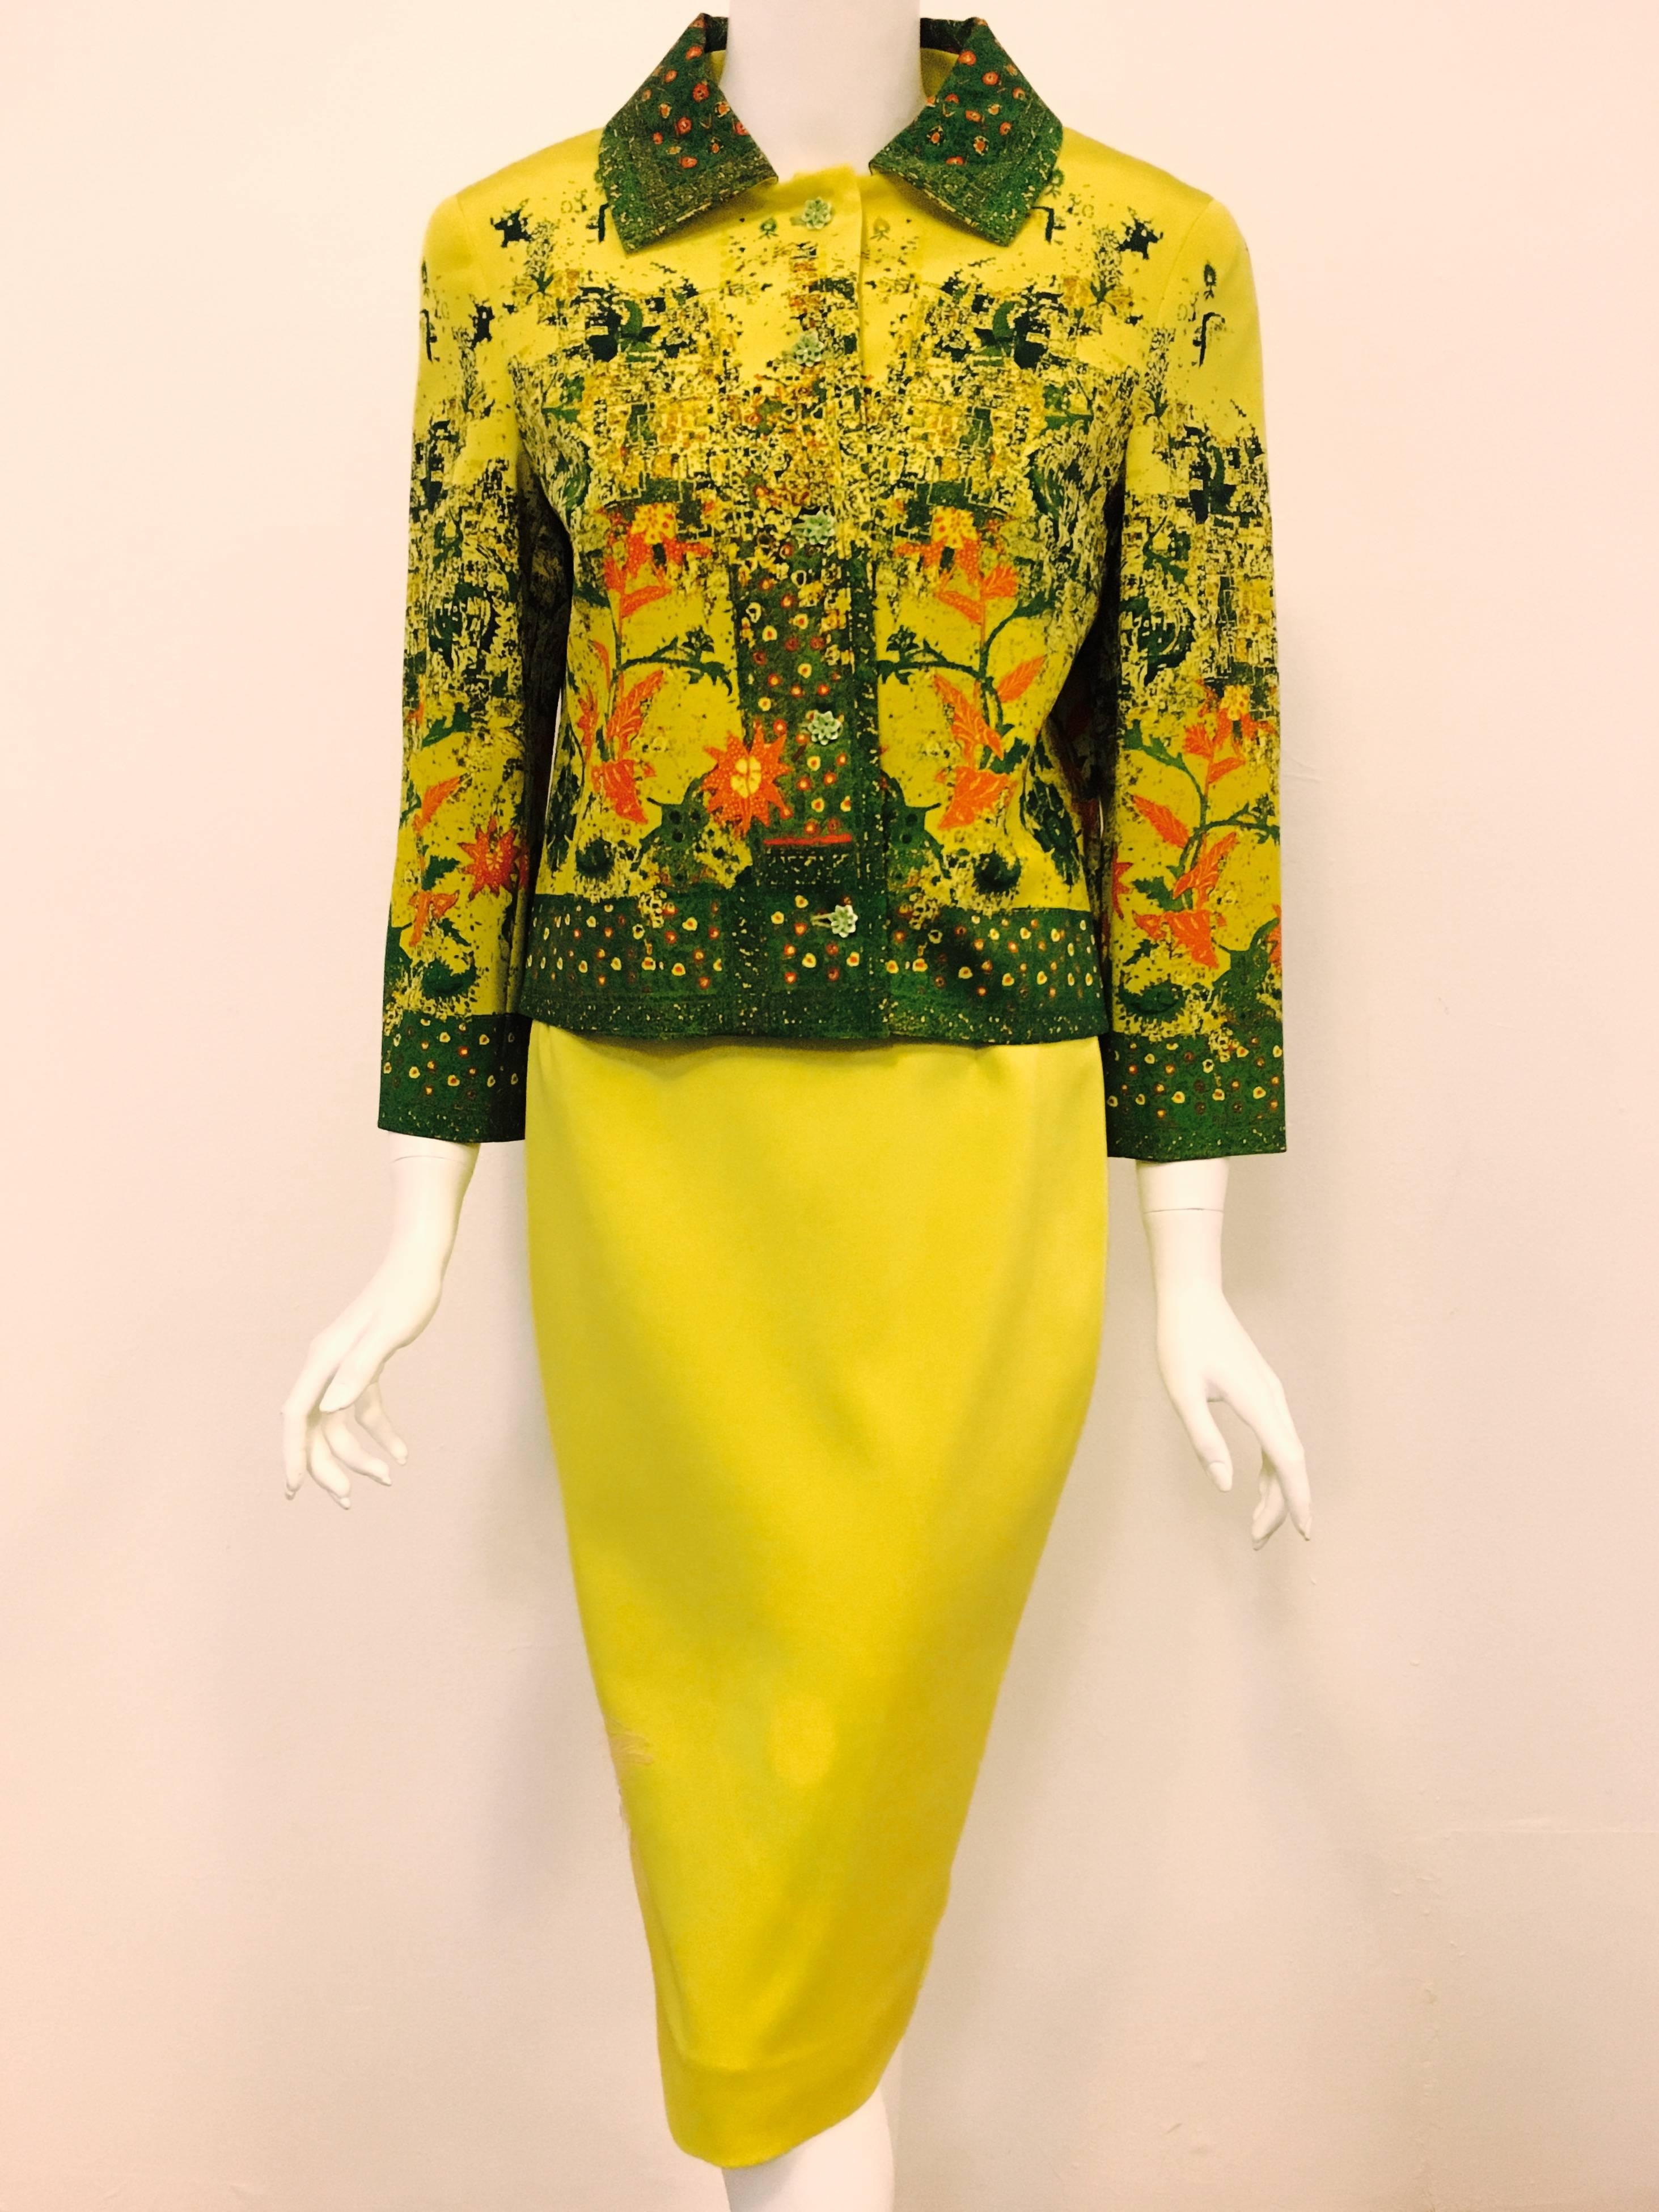 Christian Lacroix skirt suit proves why the fashion world was astounded by this French Master's work when he opened his Haute Couture house in 1987!  Simply exquisite silk blend fabric was sourced to create this sublime confection.  Only the best